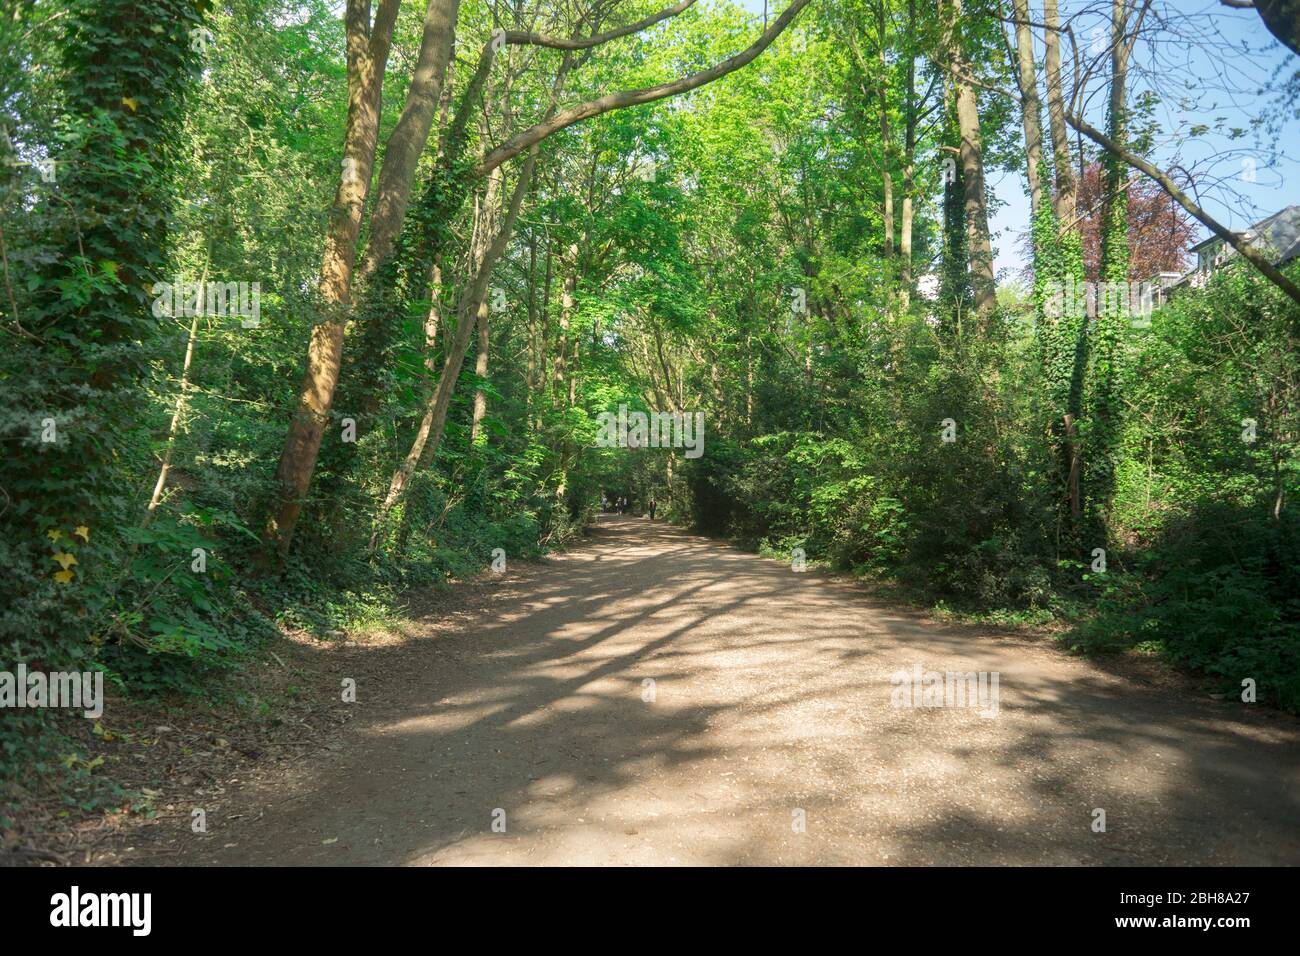 View of North London (Haringey) Nature trail (Parkland Walk) evolved over an old disused railway line. Seen April 2020. Stock Photo